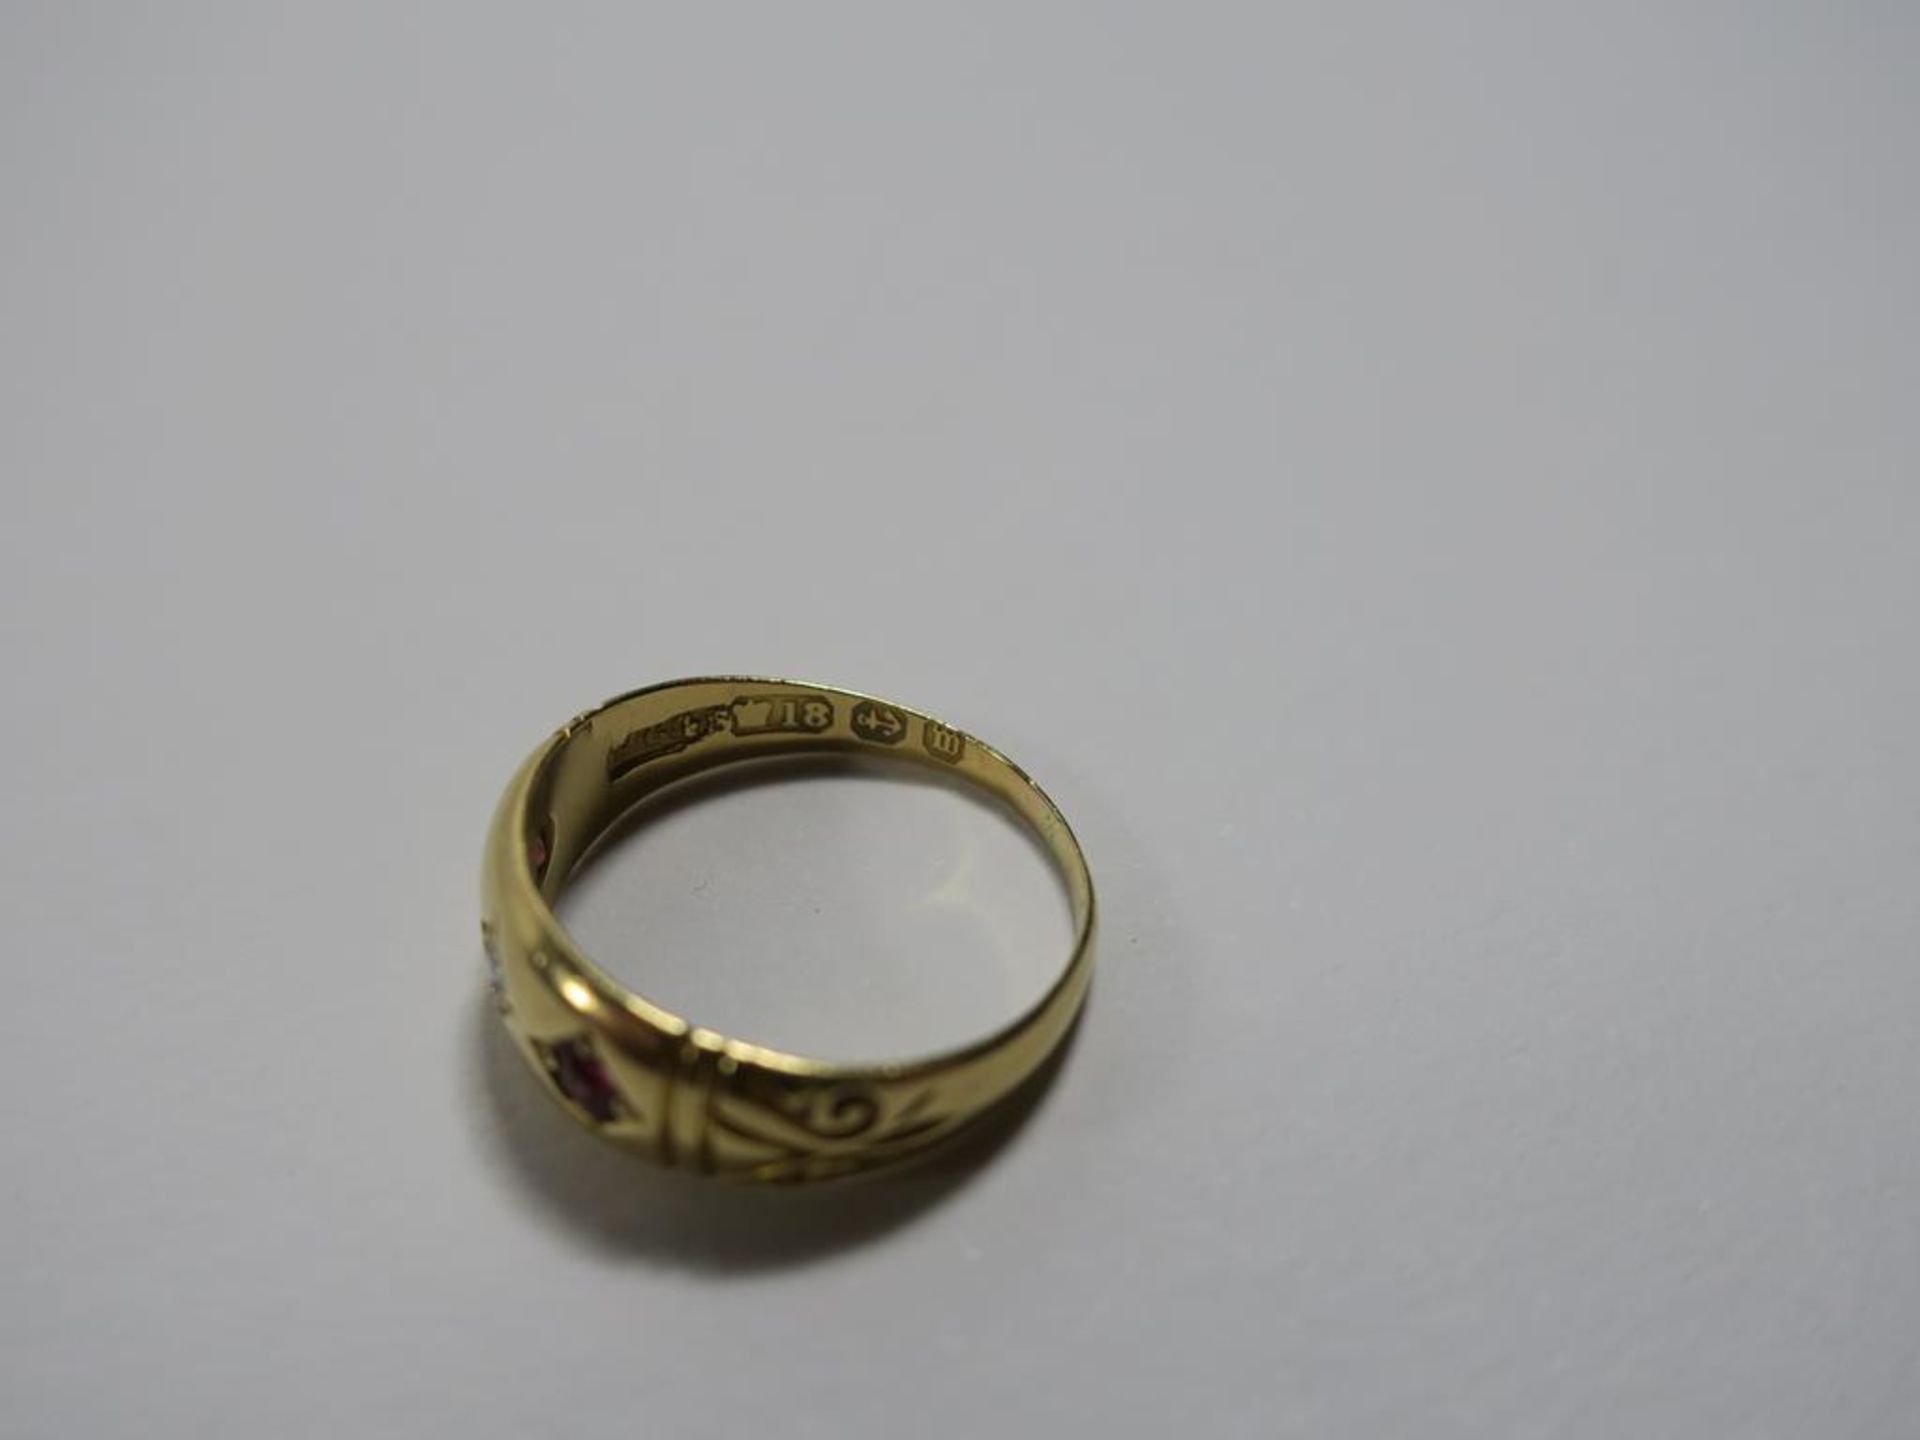 18ct Gold Ring with 1/16 Diamond and two Rubies, size K, approx 2.8g (est £120-£150) - Image 5 of 7